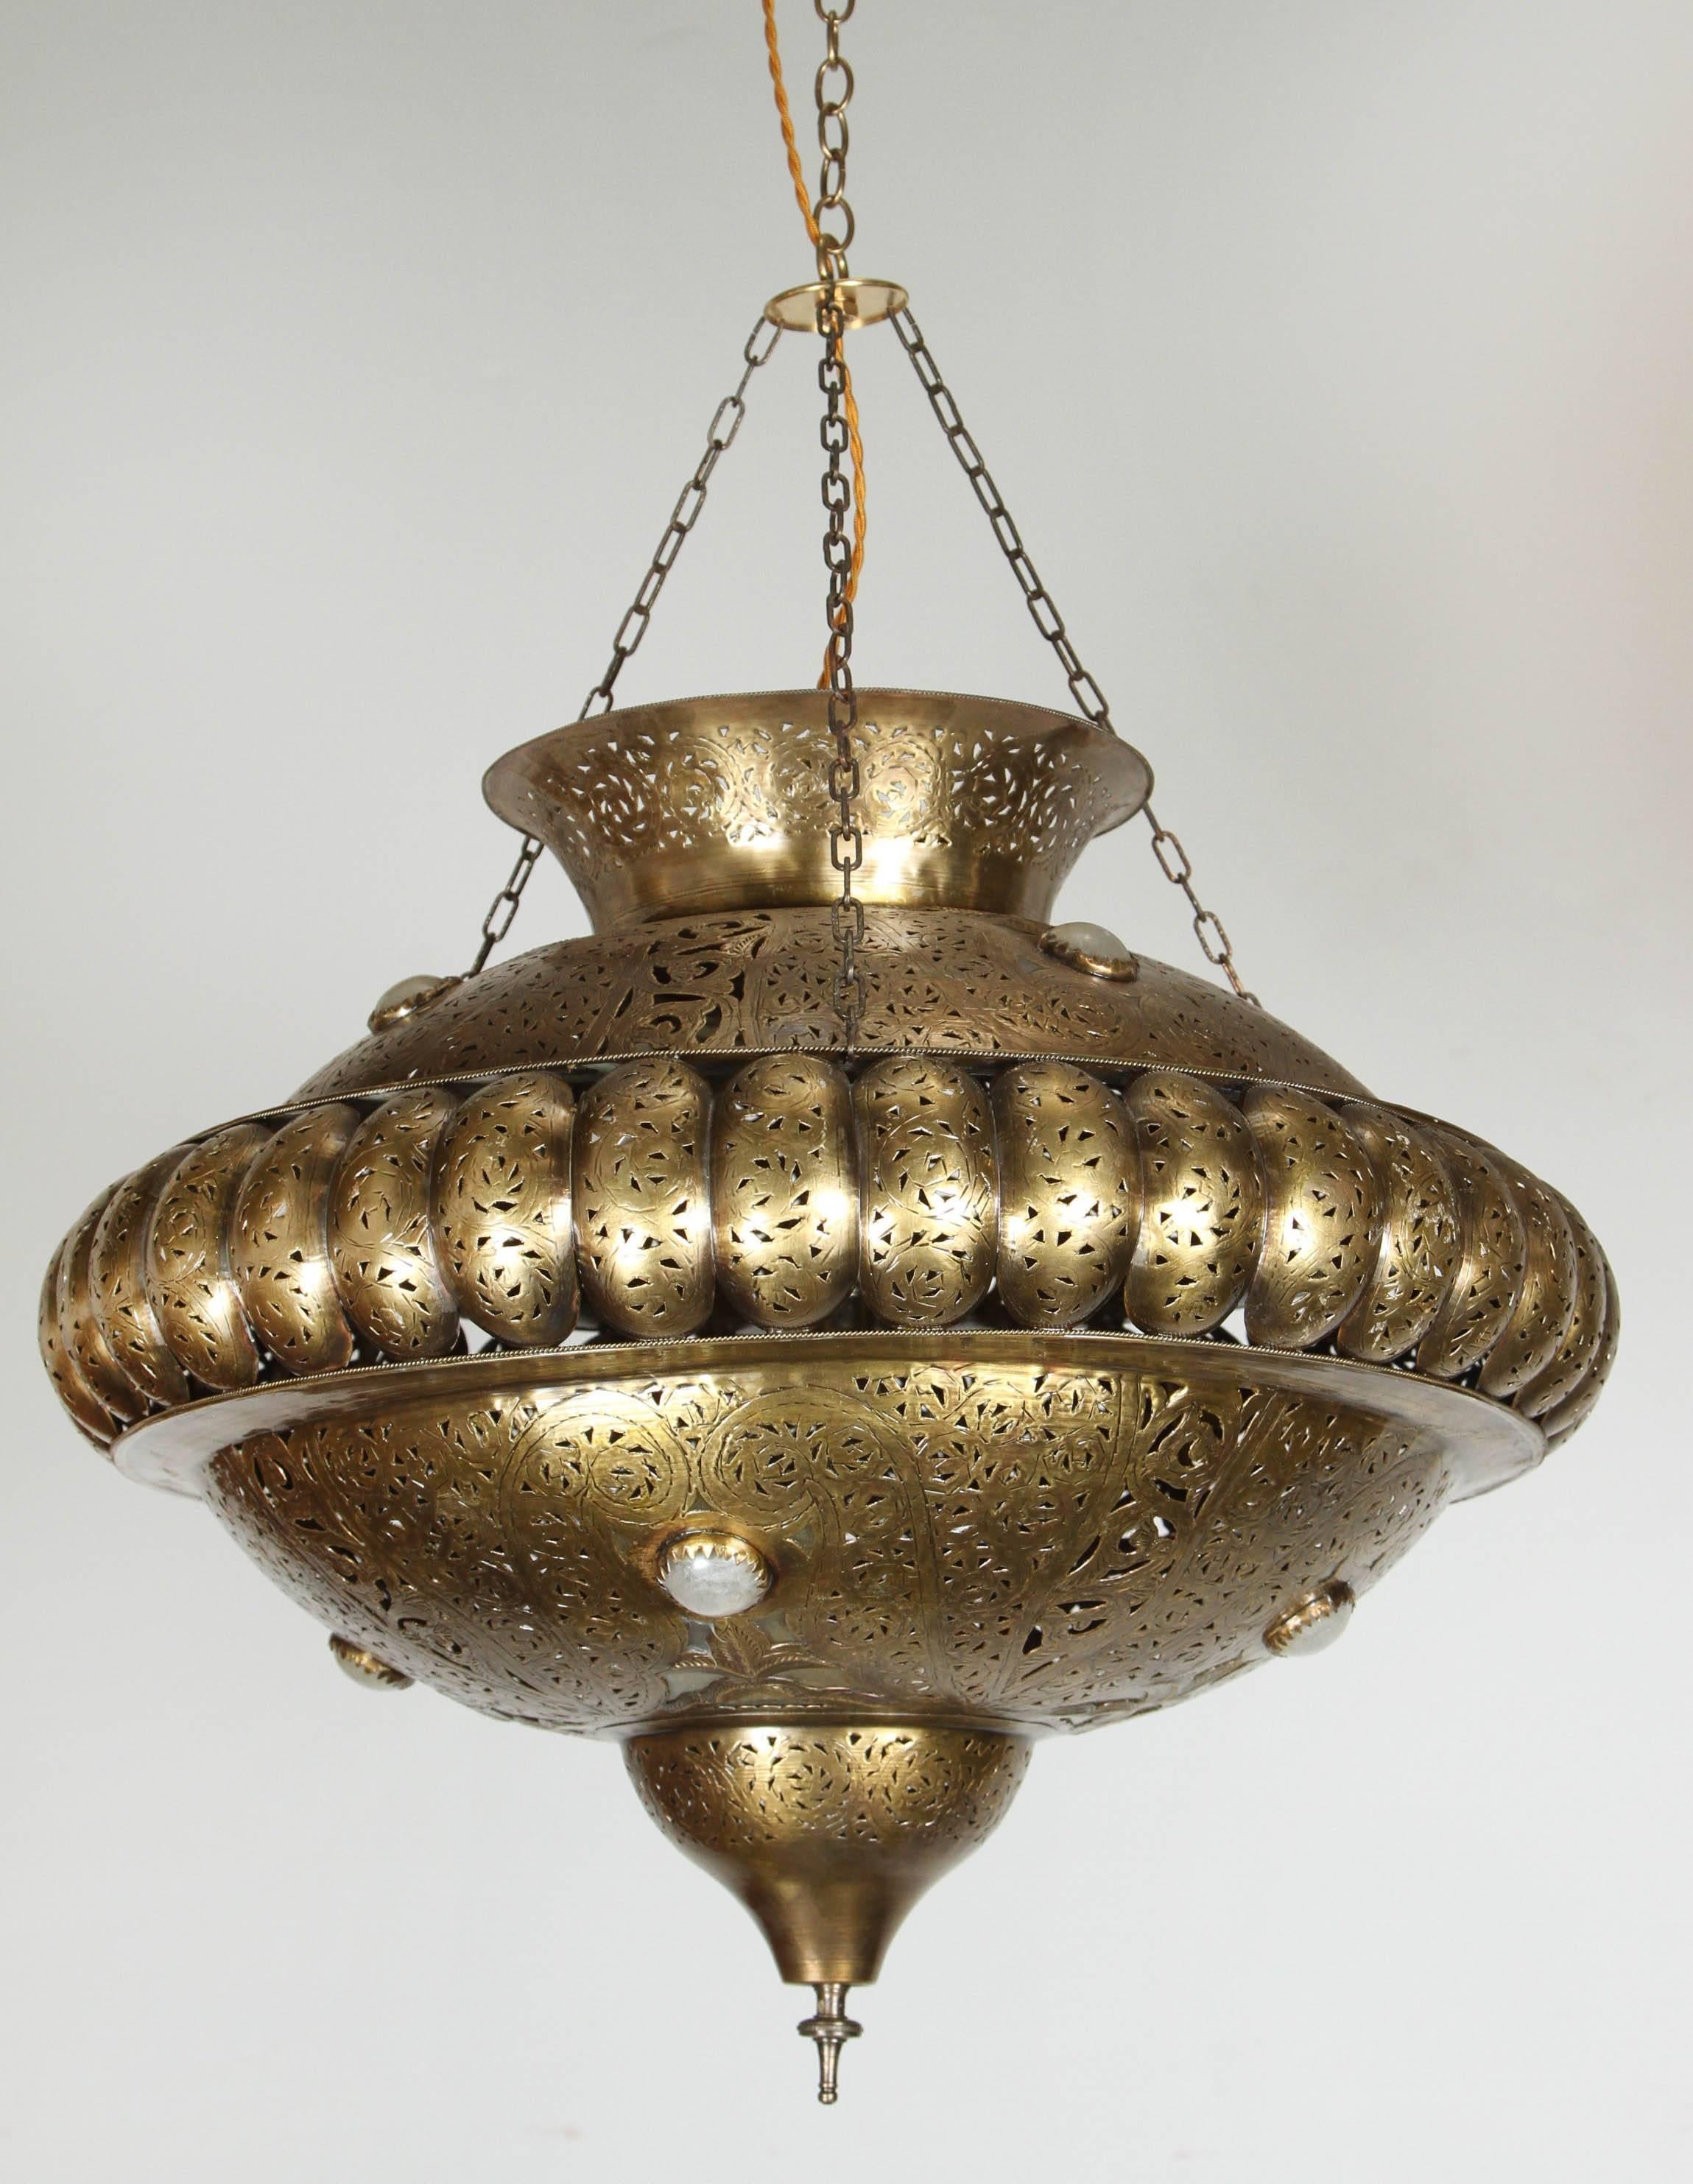 Pierced brass Moroccan pendant in the style of Alberto Pinto Moorish design.
This Moorish light fixture is delicately handcrafted and chiseled with Fine filigree designs by skilled Moroccan artisans.
Rewired for a single light source one socket up